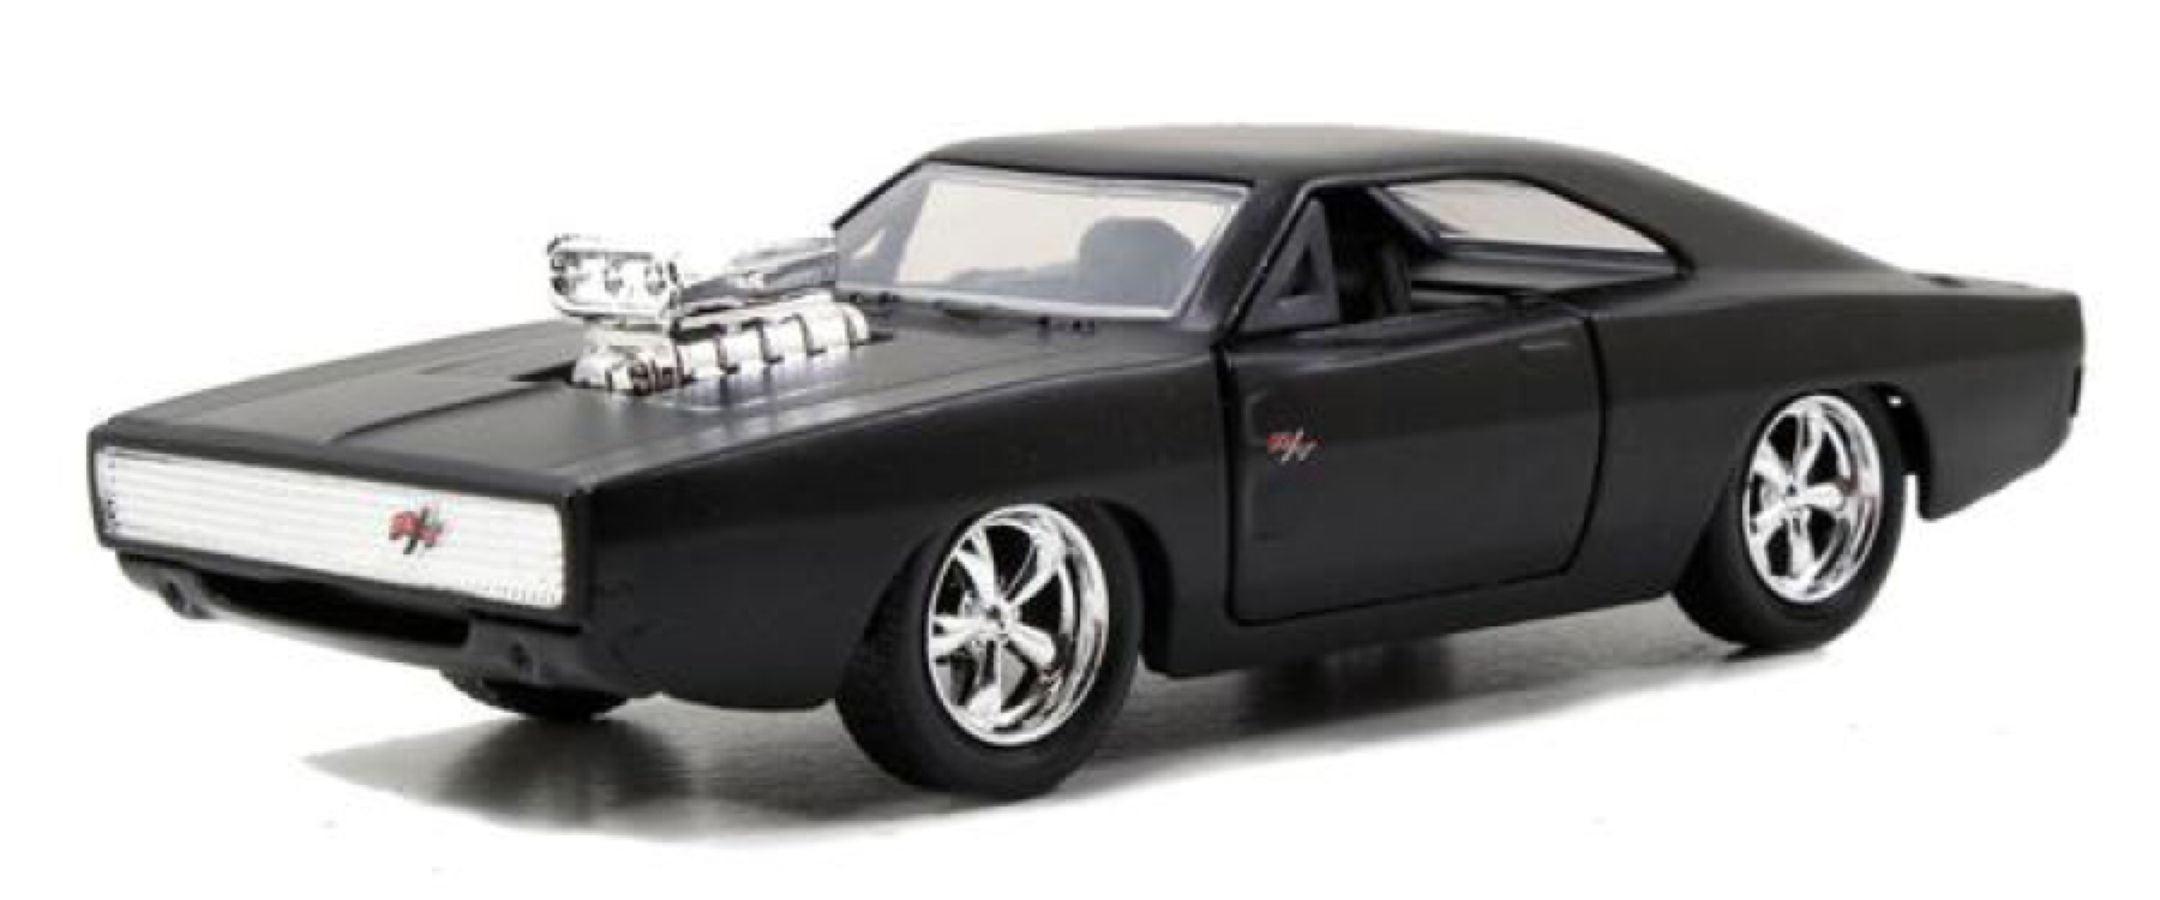 JAD97214 Fast and Furious - 1970 Dodge Charger Street 1:32 Scale Hollywood Ride - Jada Toys - Titan Pop Culture